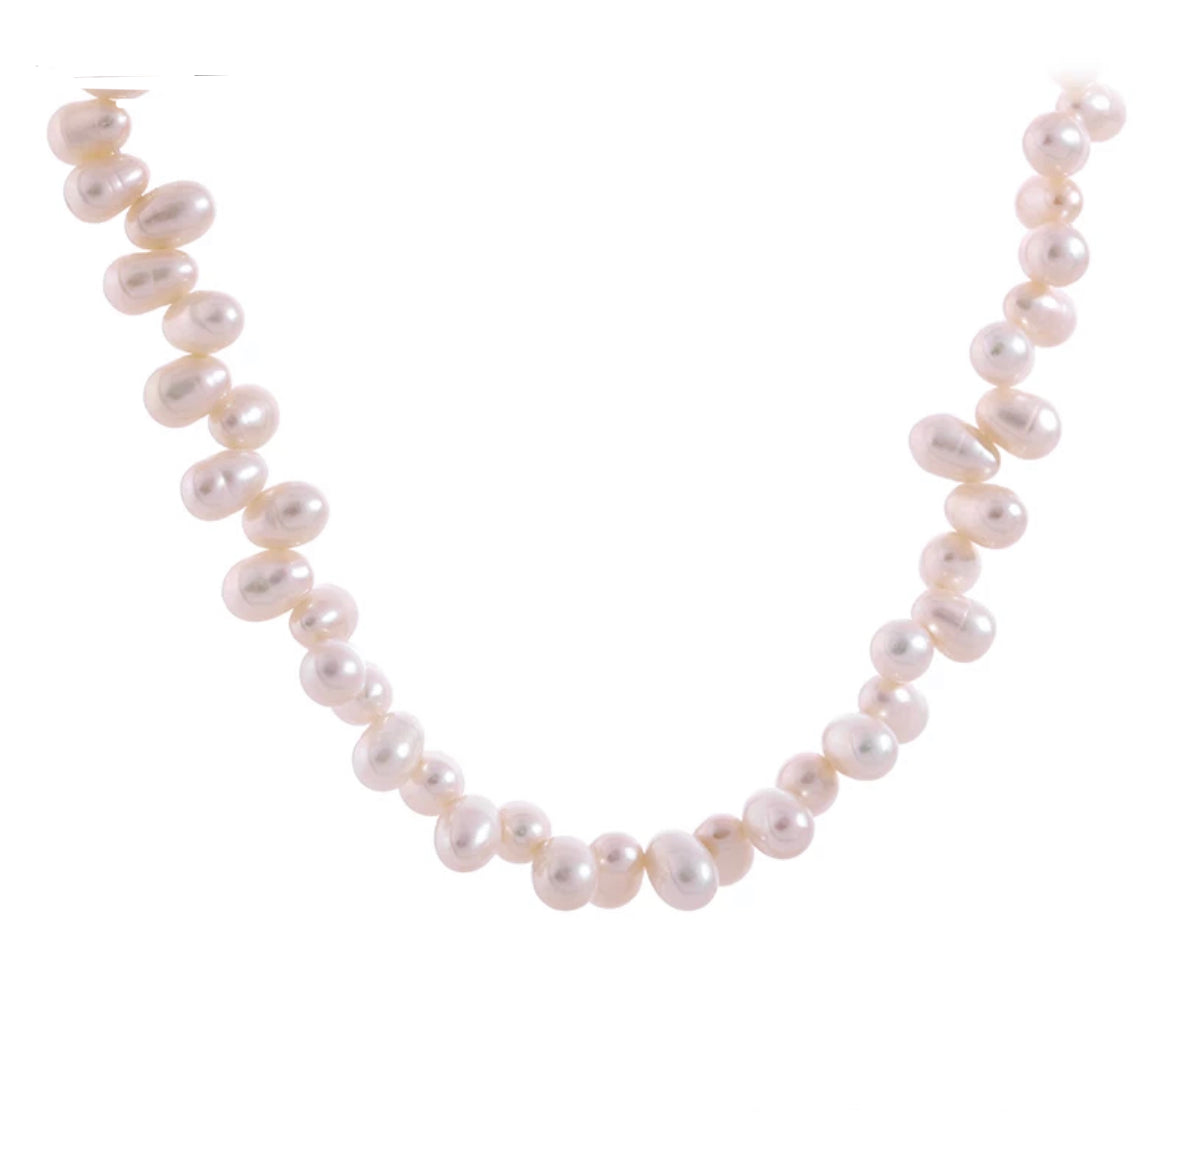 Small Freshwater Pearl Necklace. (14 karat Solid Gold) - CG348N. Start –  Chic in Gold